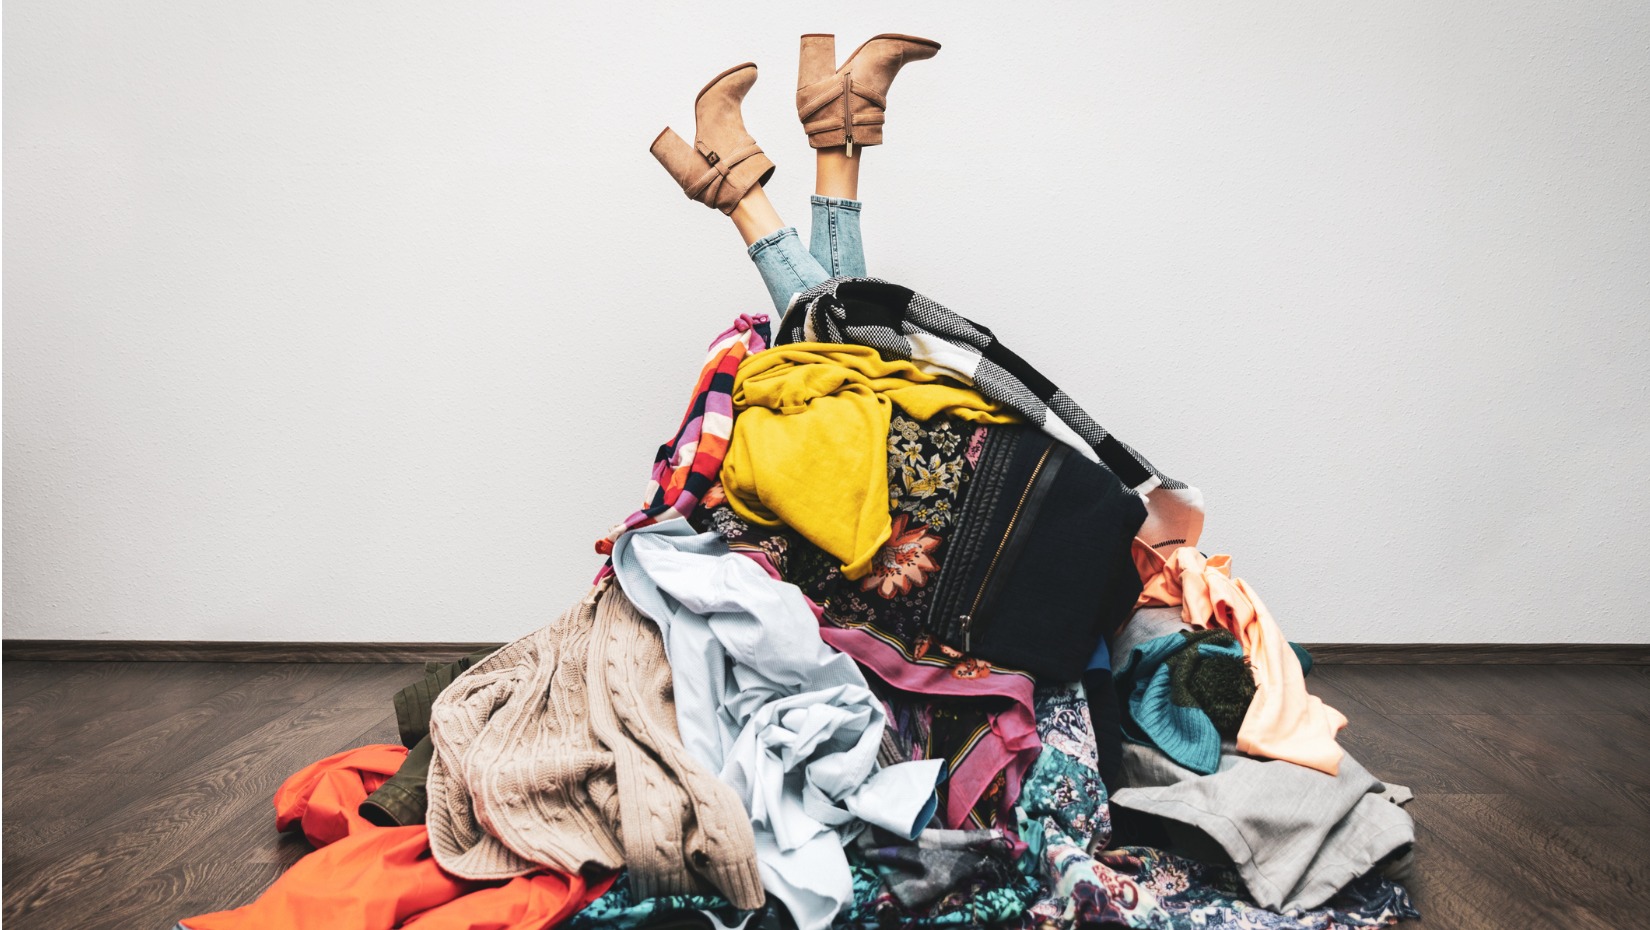 woman-legs-out-of-a-pile-of-clothes-on-the-floor-shopping-addiction-picture-id1190179908